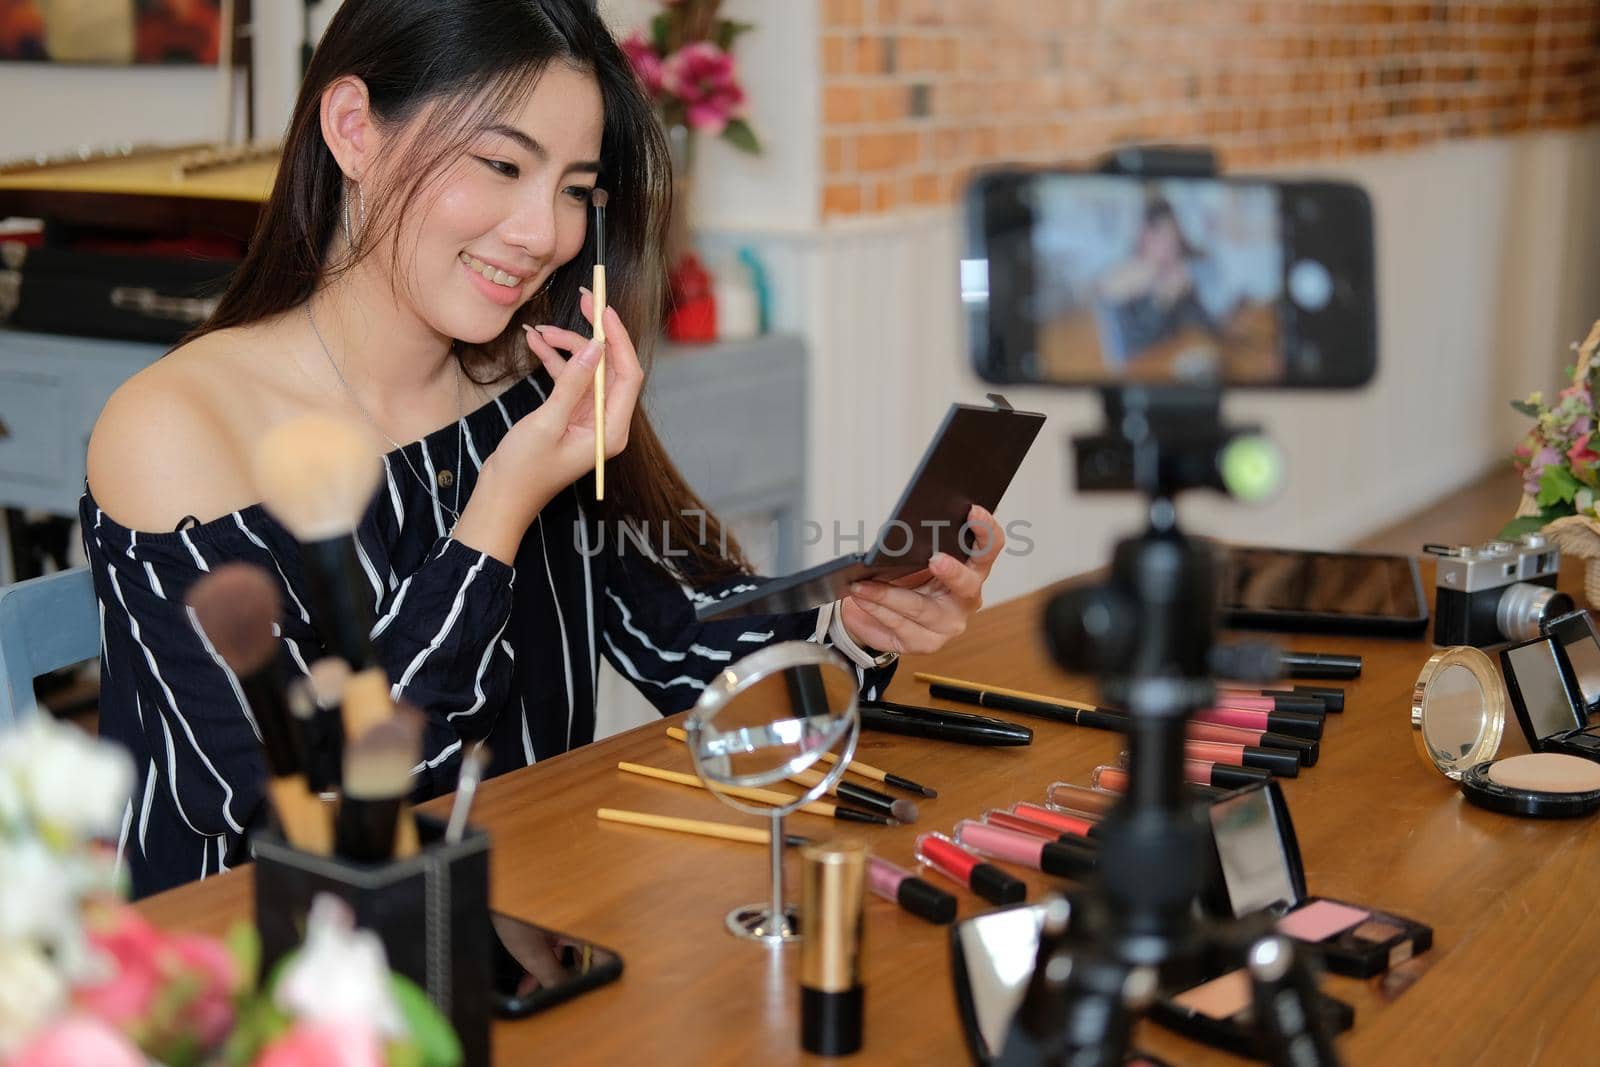 beauty blogger live broadcasting cosmetic makeup tutorial on social media. by pp99